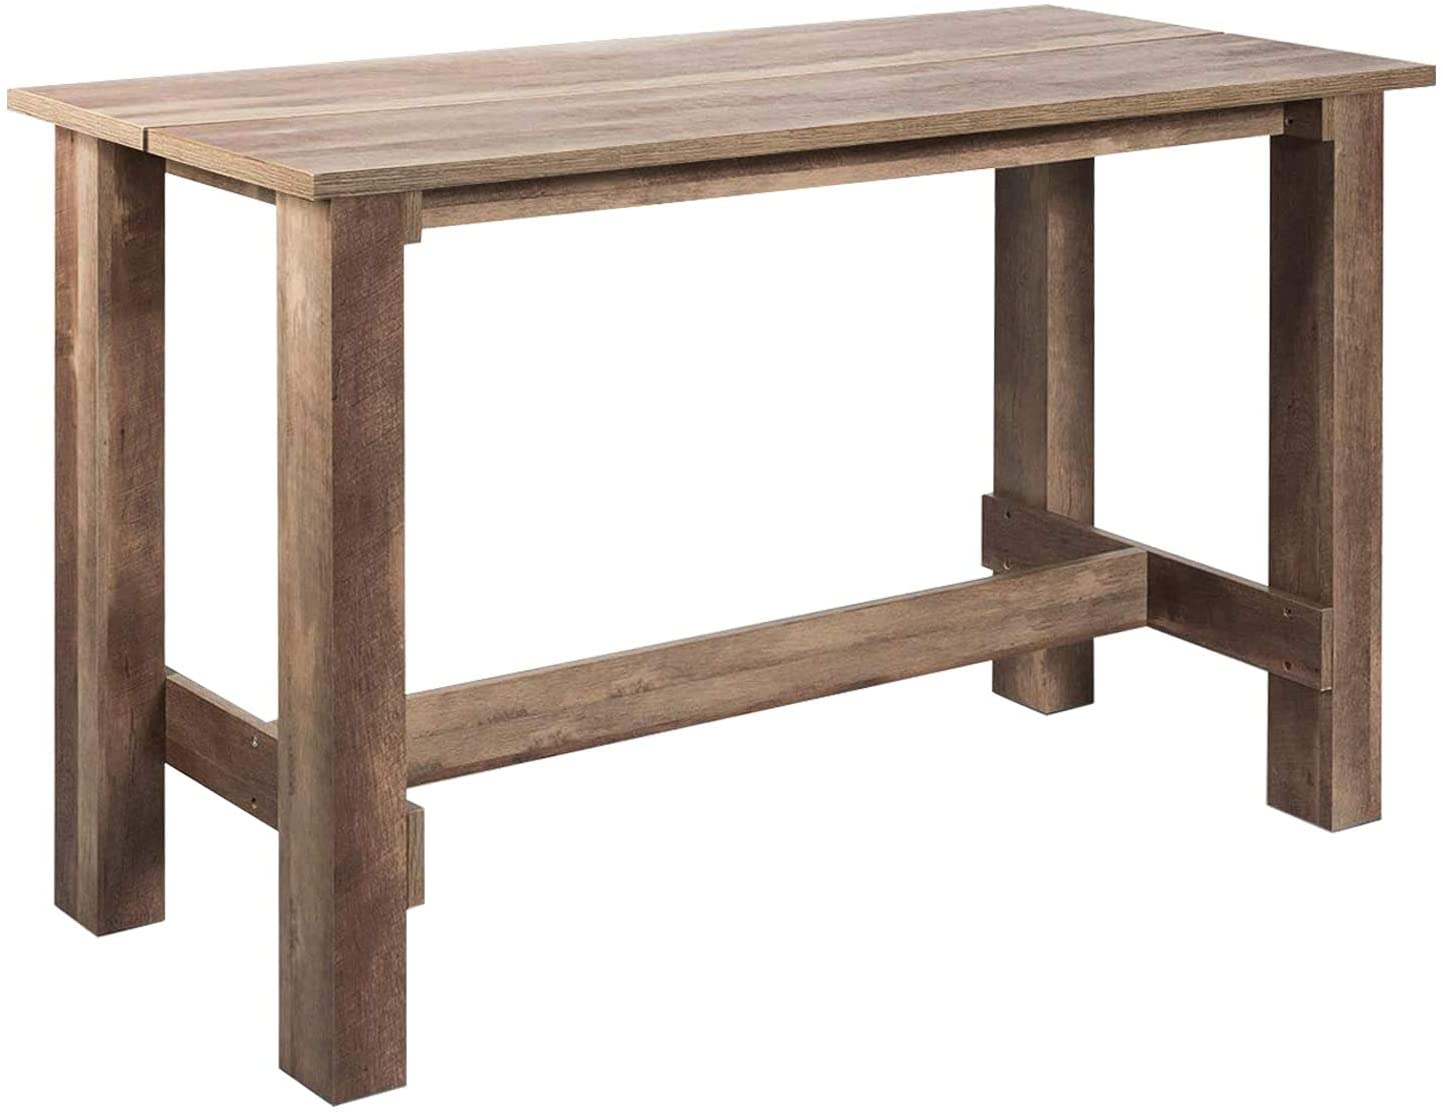 B08Q39LQ22 Farmhouse Dining Table,Rustic Rectangular Dining Room Table Kitchen Island Bar Table Bistro Table Counter Height, Home Office Desk for Living Room, Office，55”L x25.5”W x35.5”H